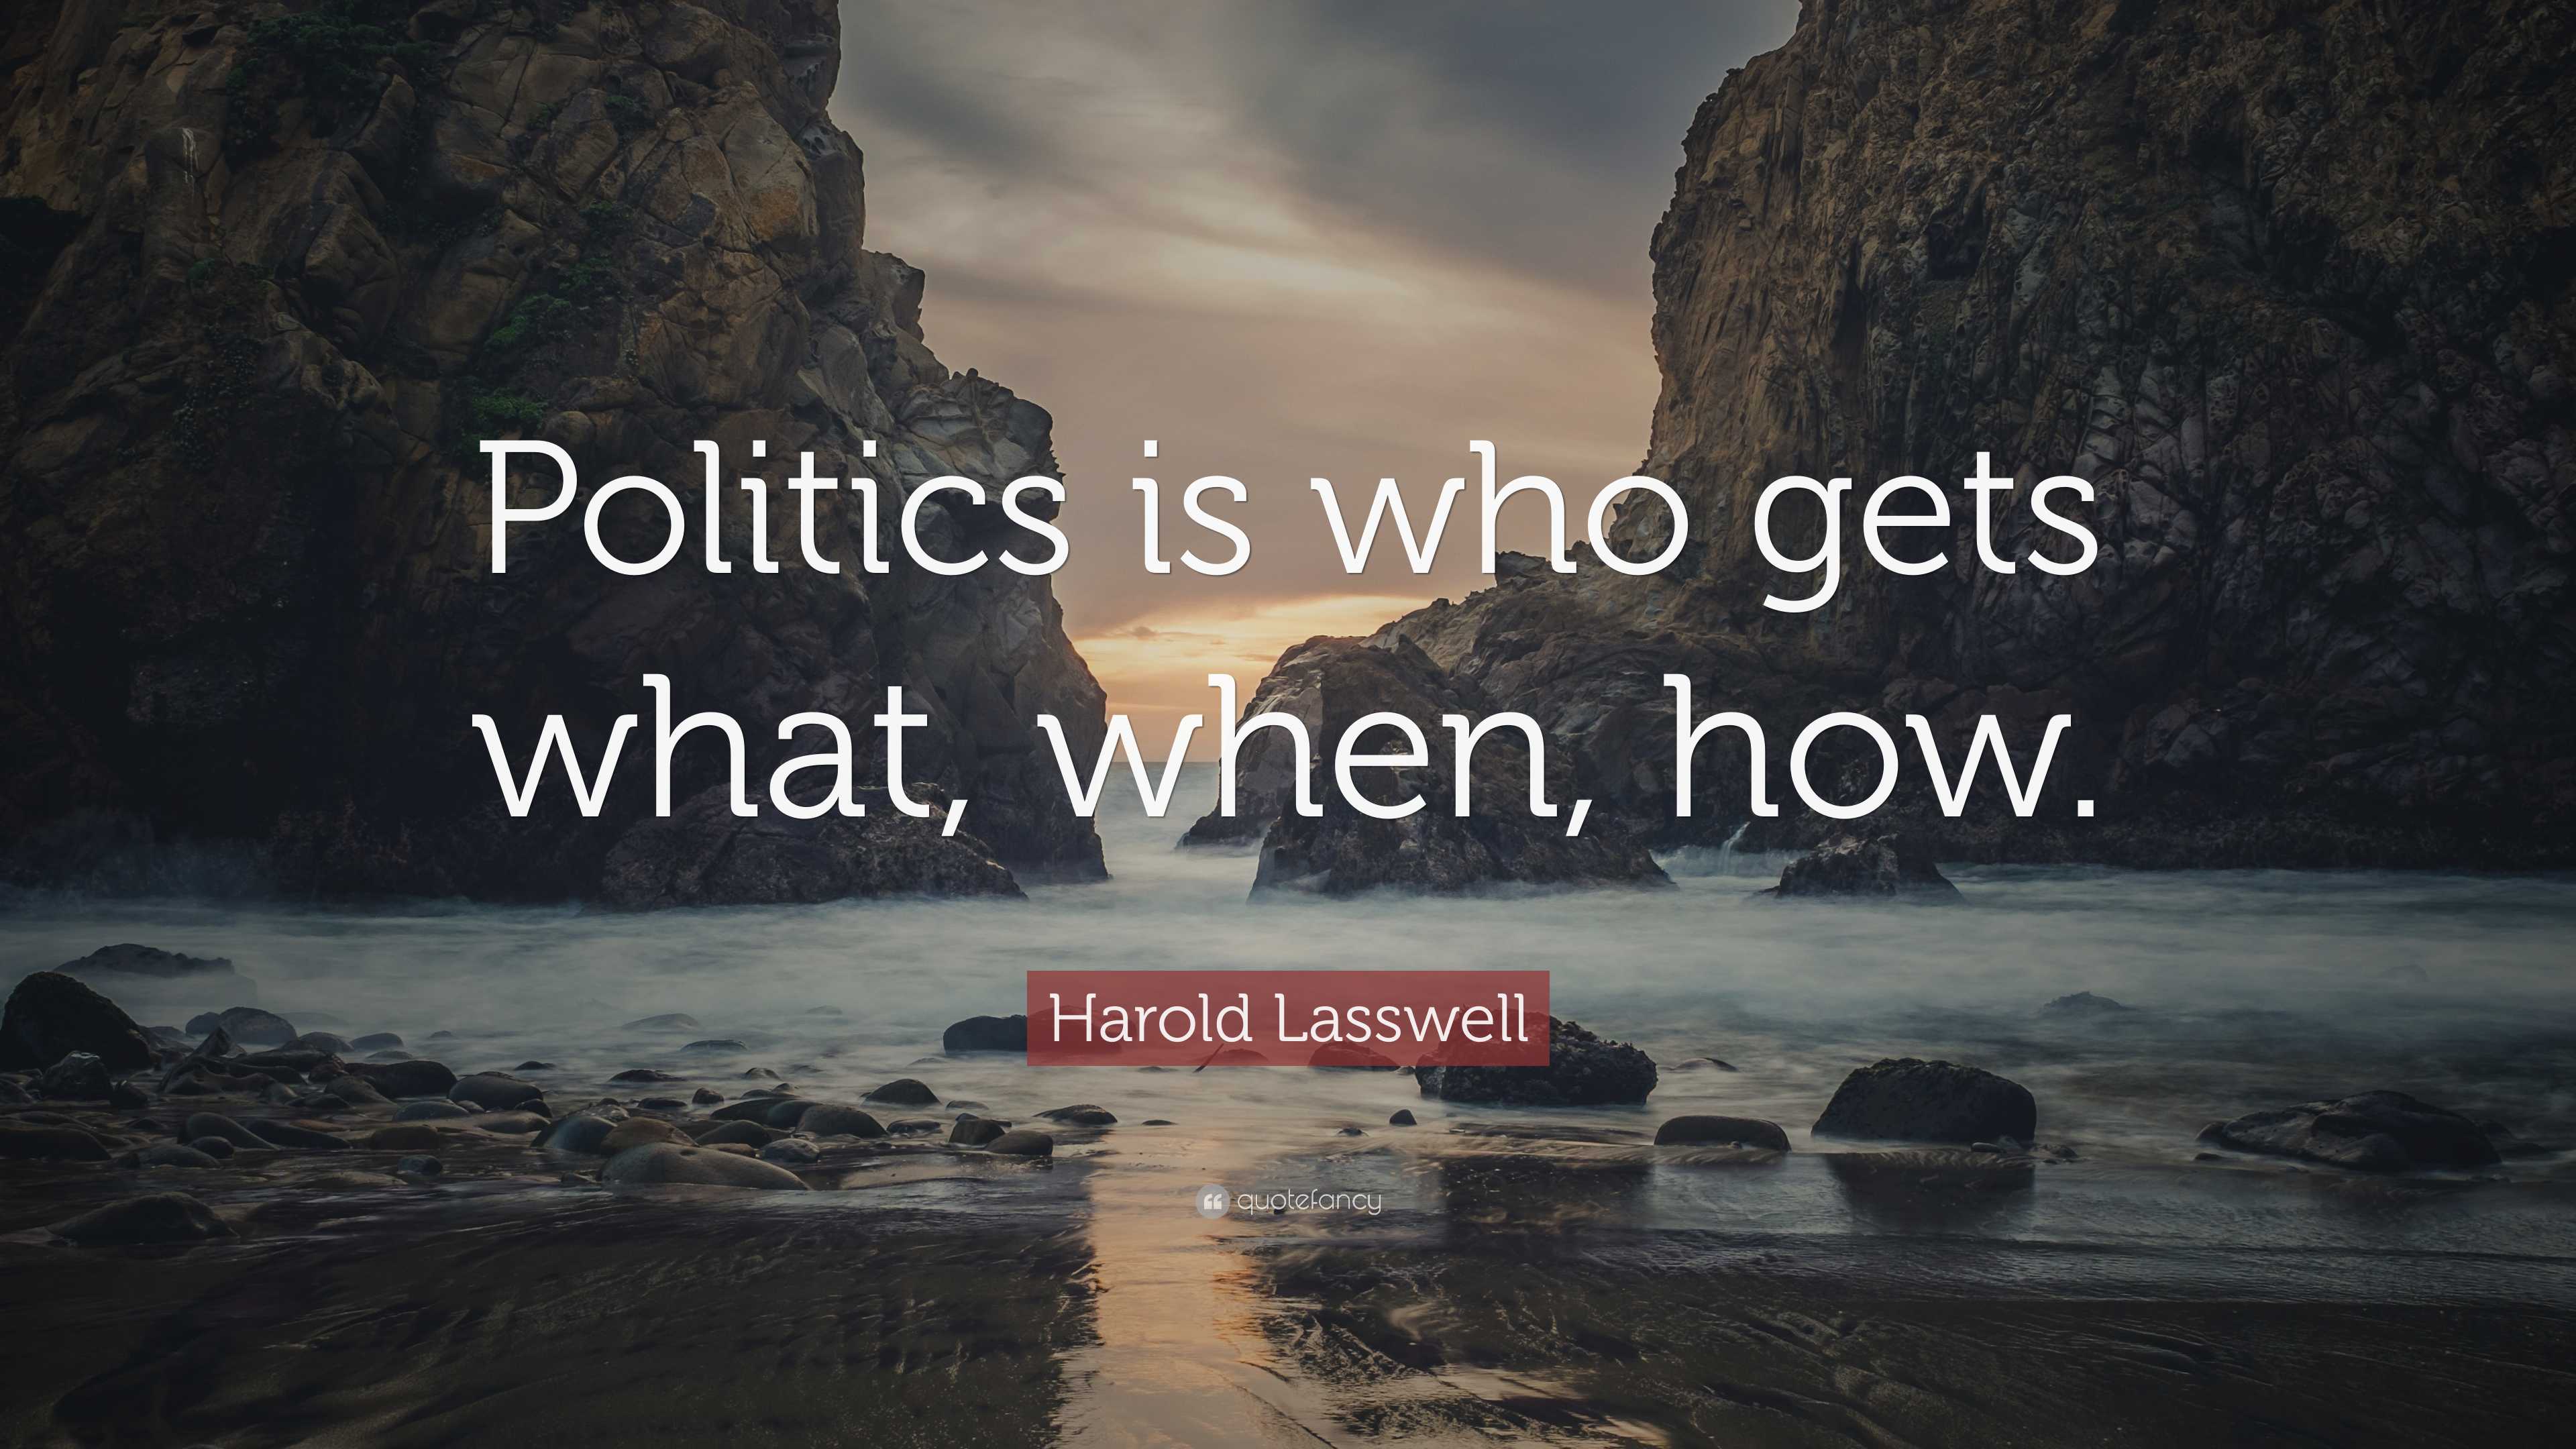 Harold Lasswell Quote: “Politics is who gets what, when, how.”